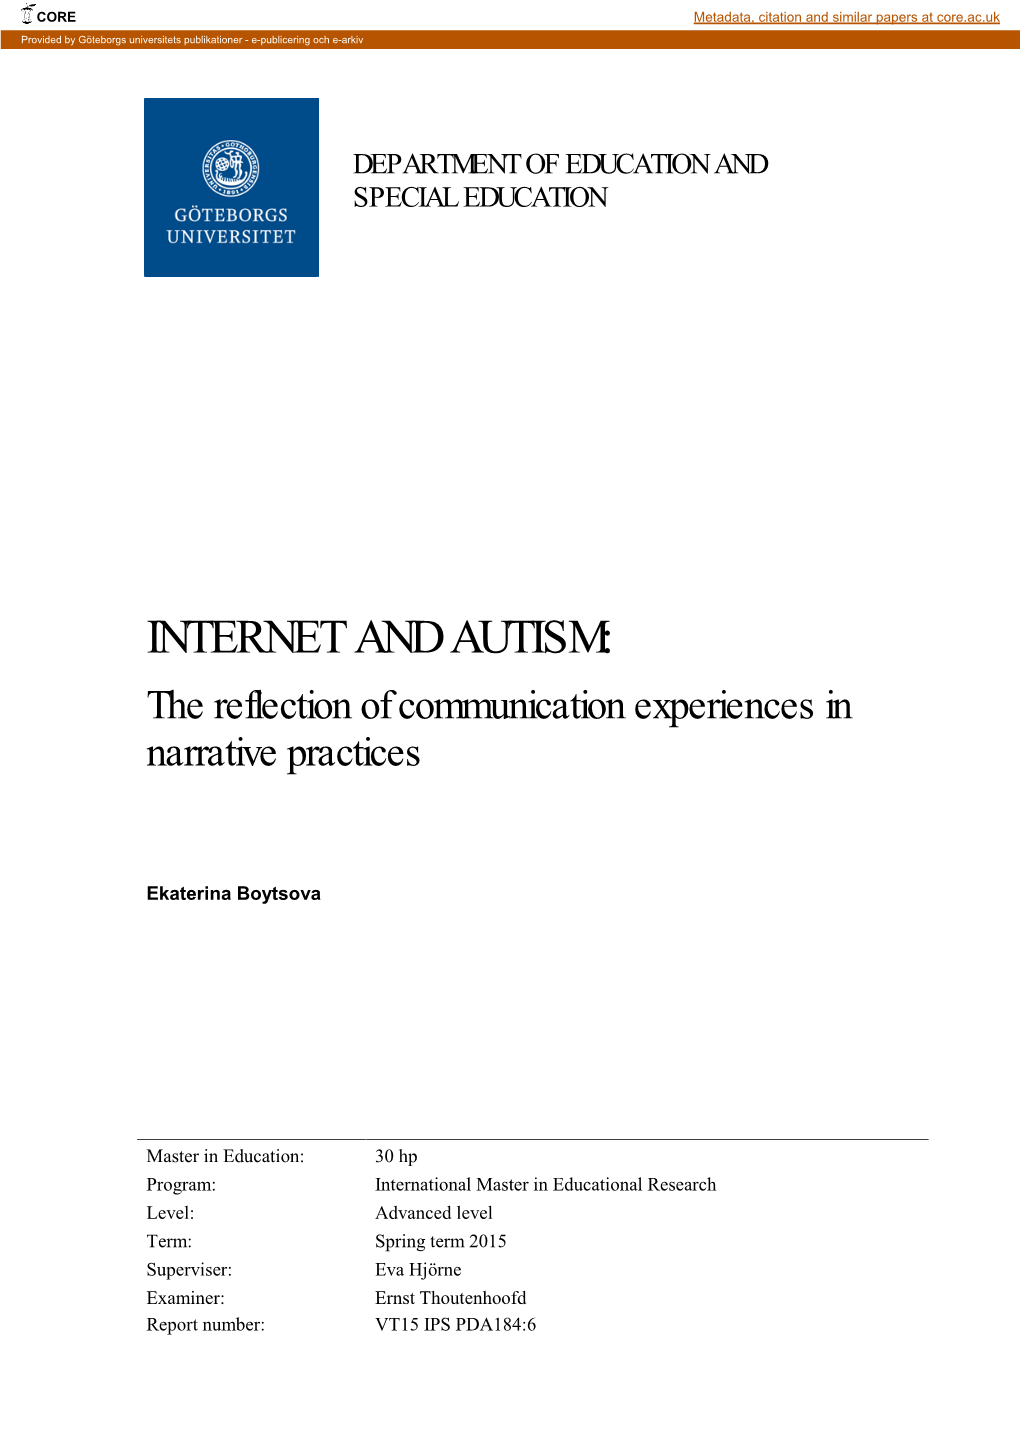 INTERNET and AUTISM: the Reflection of Communication Experiences in Narrative Practices